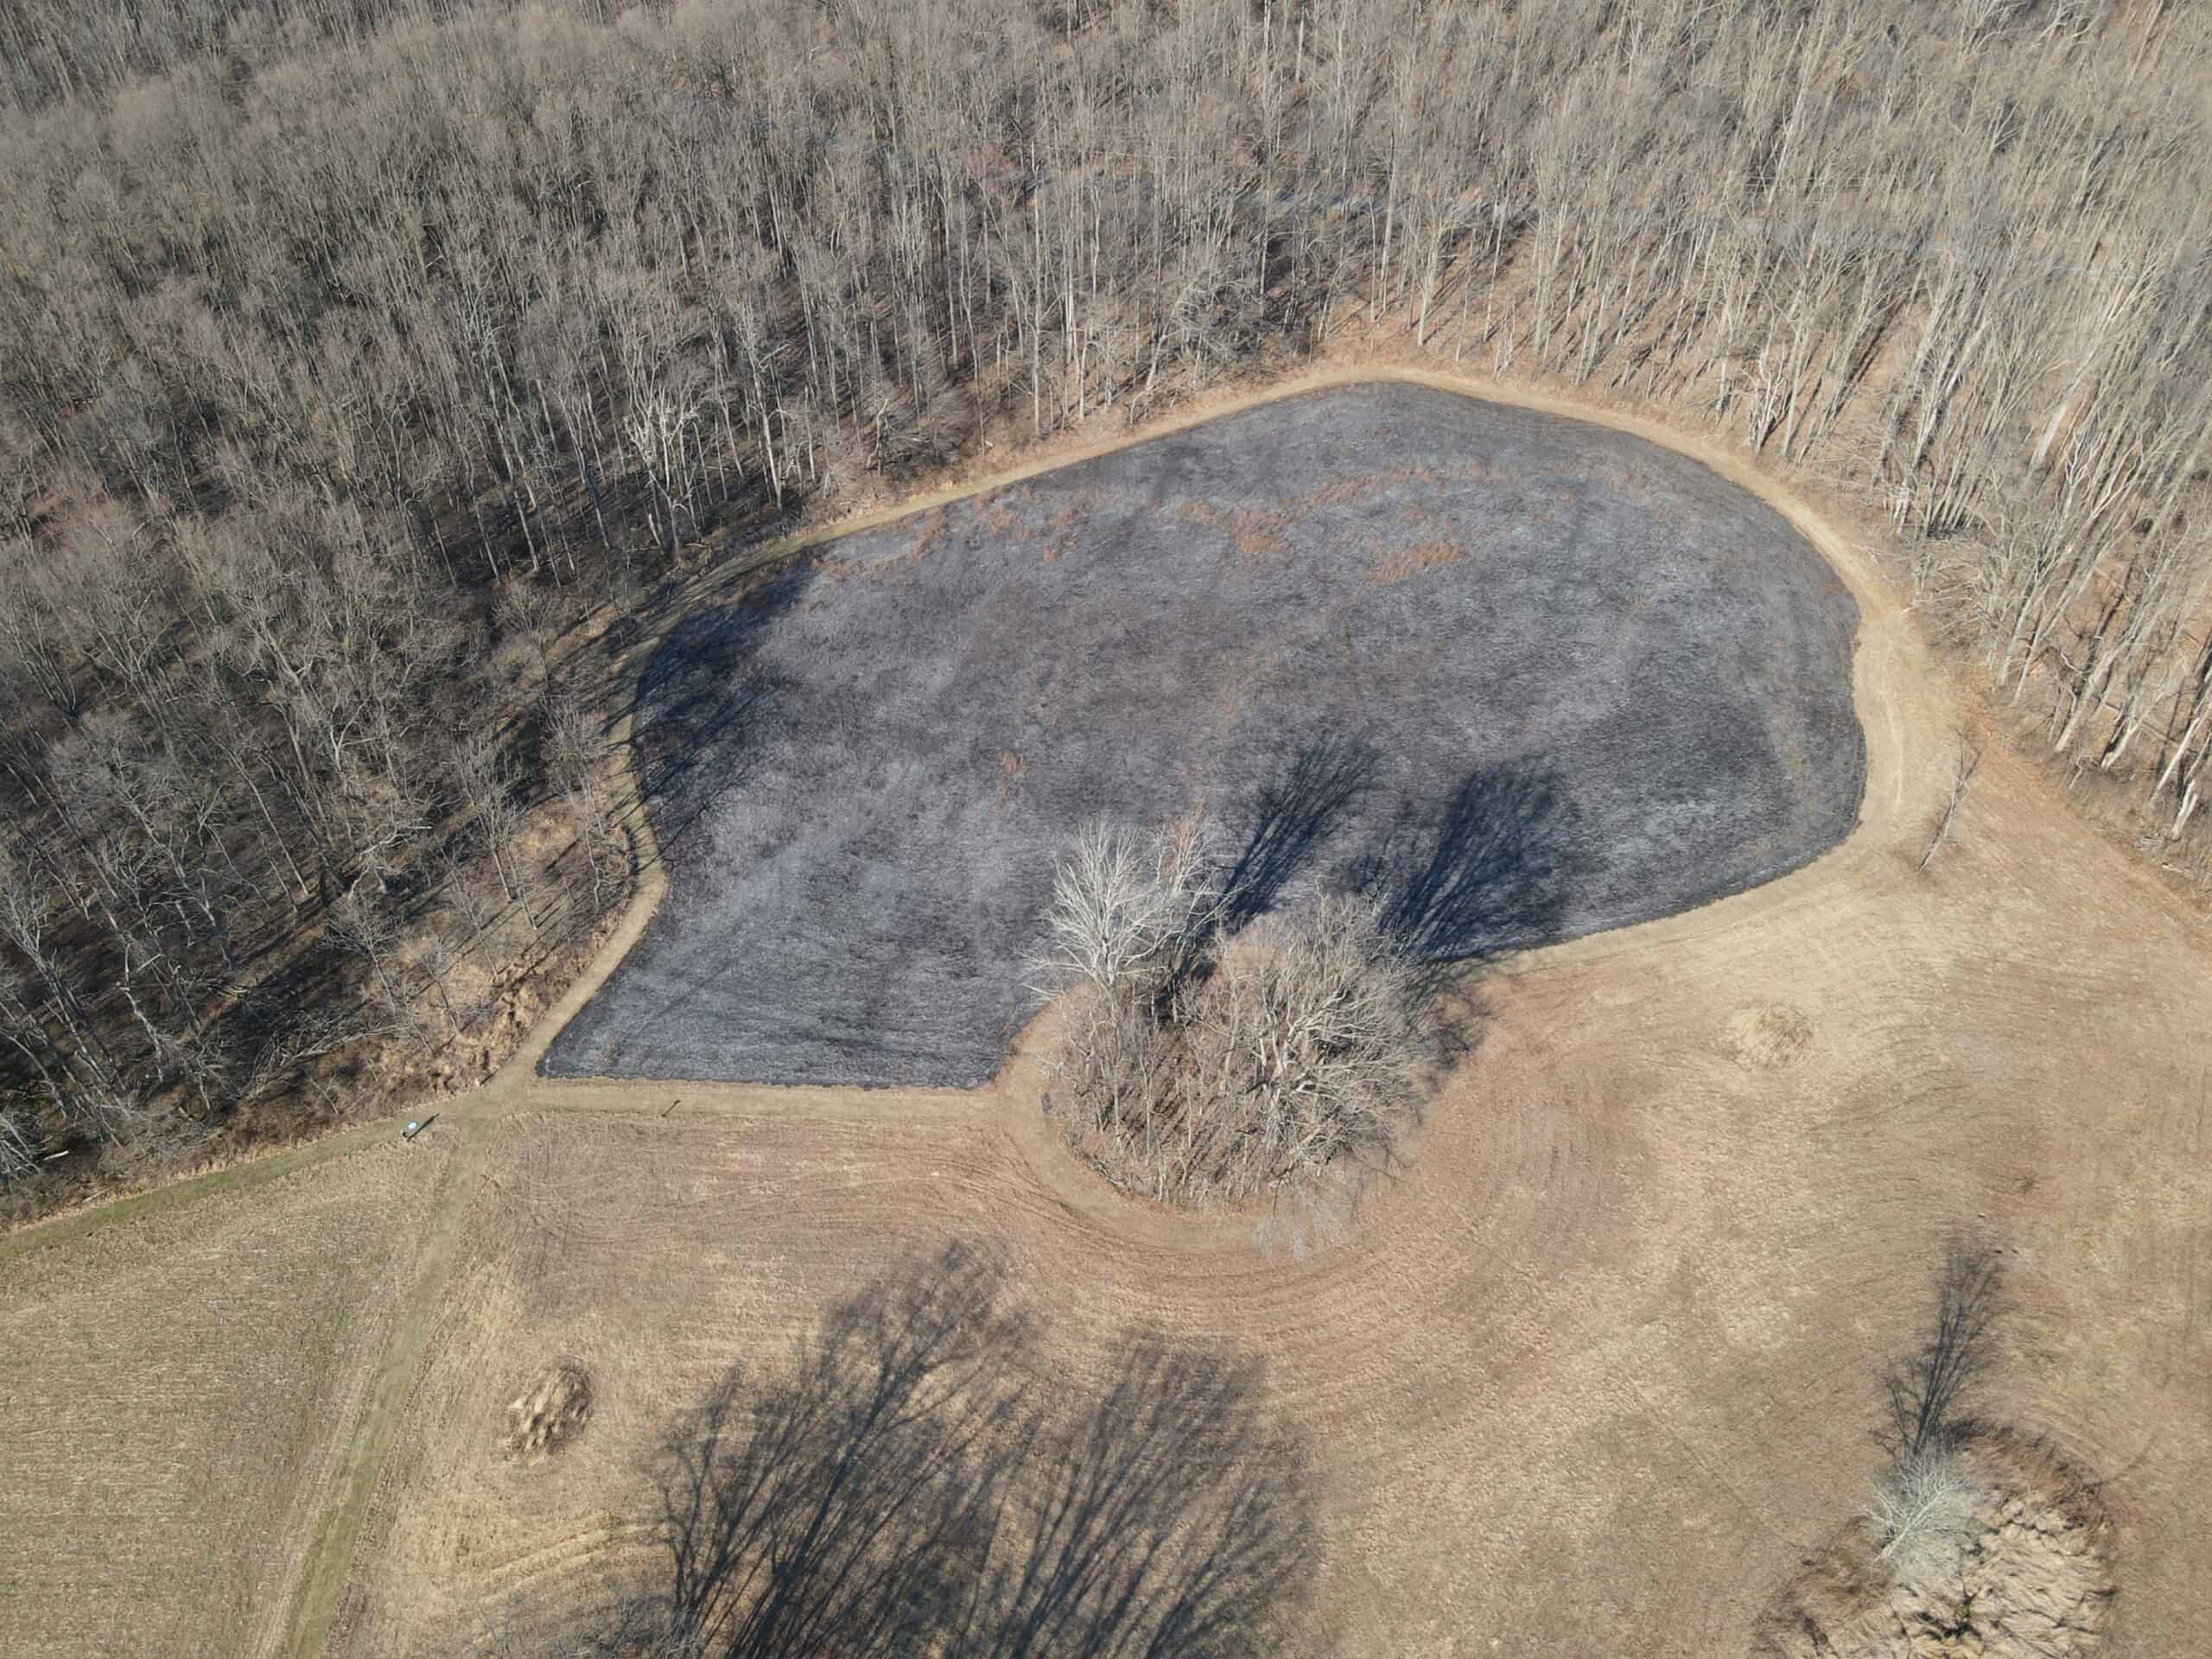 Drone photo of area burned in prescribed fire of meadow at Crow's Nest Preserve